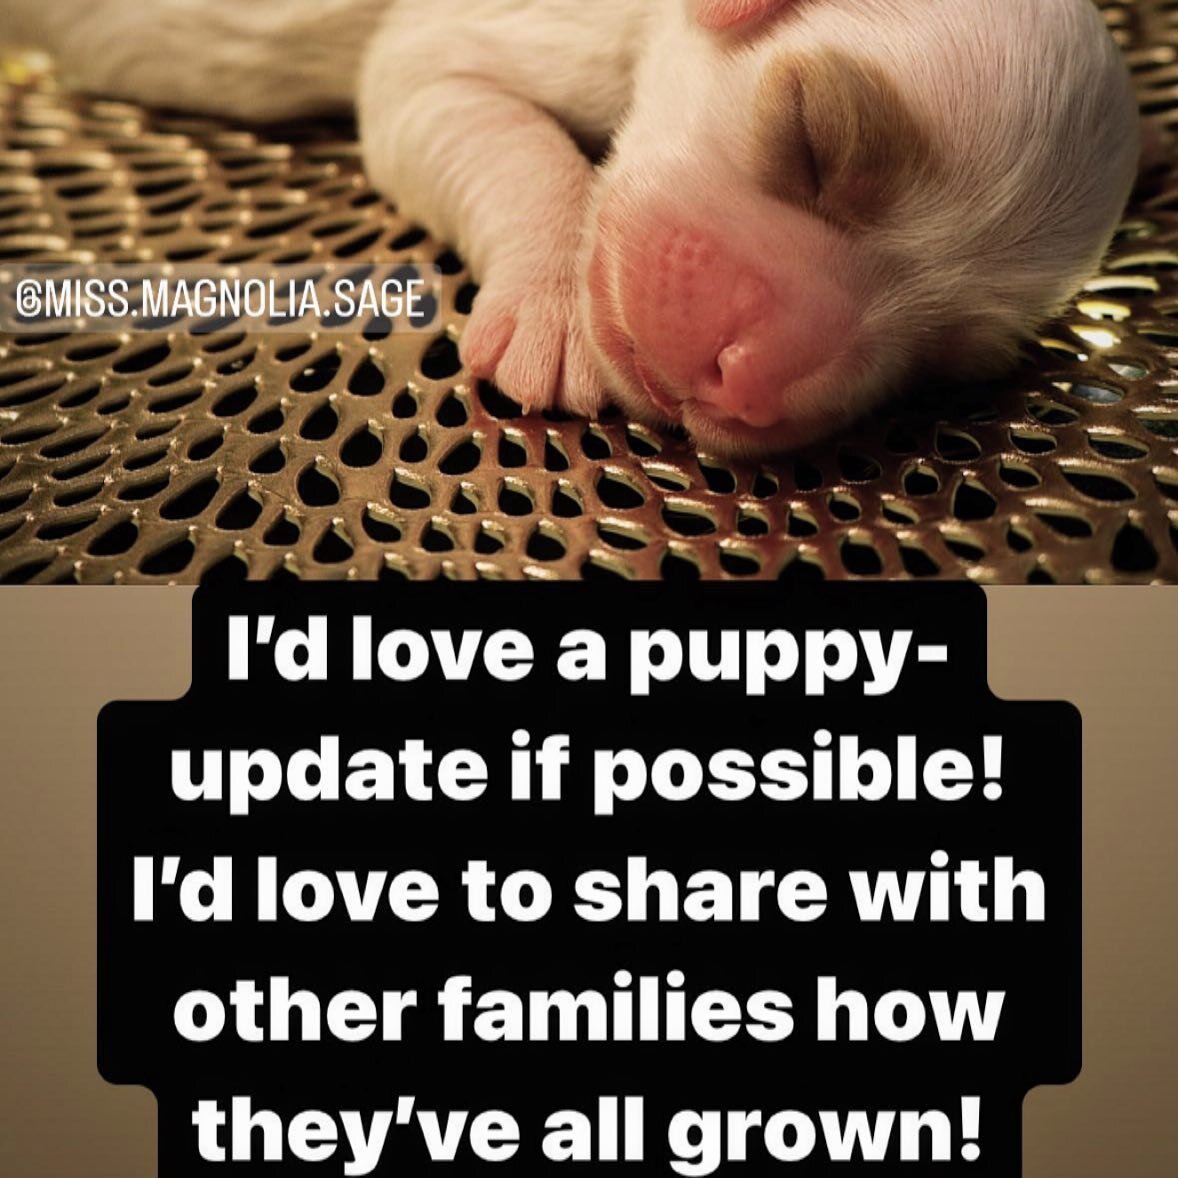 🐶 Calling for a puppy-update from past families! I&rsquo;d love to share with everyone how they&rsquo;ve grown. If you&rsquo;d like, I&rsquo;ll also share an approximate location for each family so they can arrange playdates if they&rsquo;d like (ie